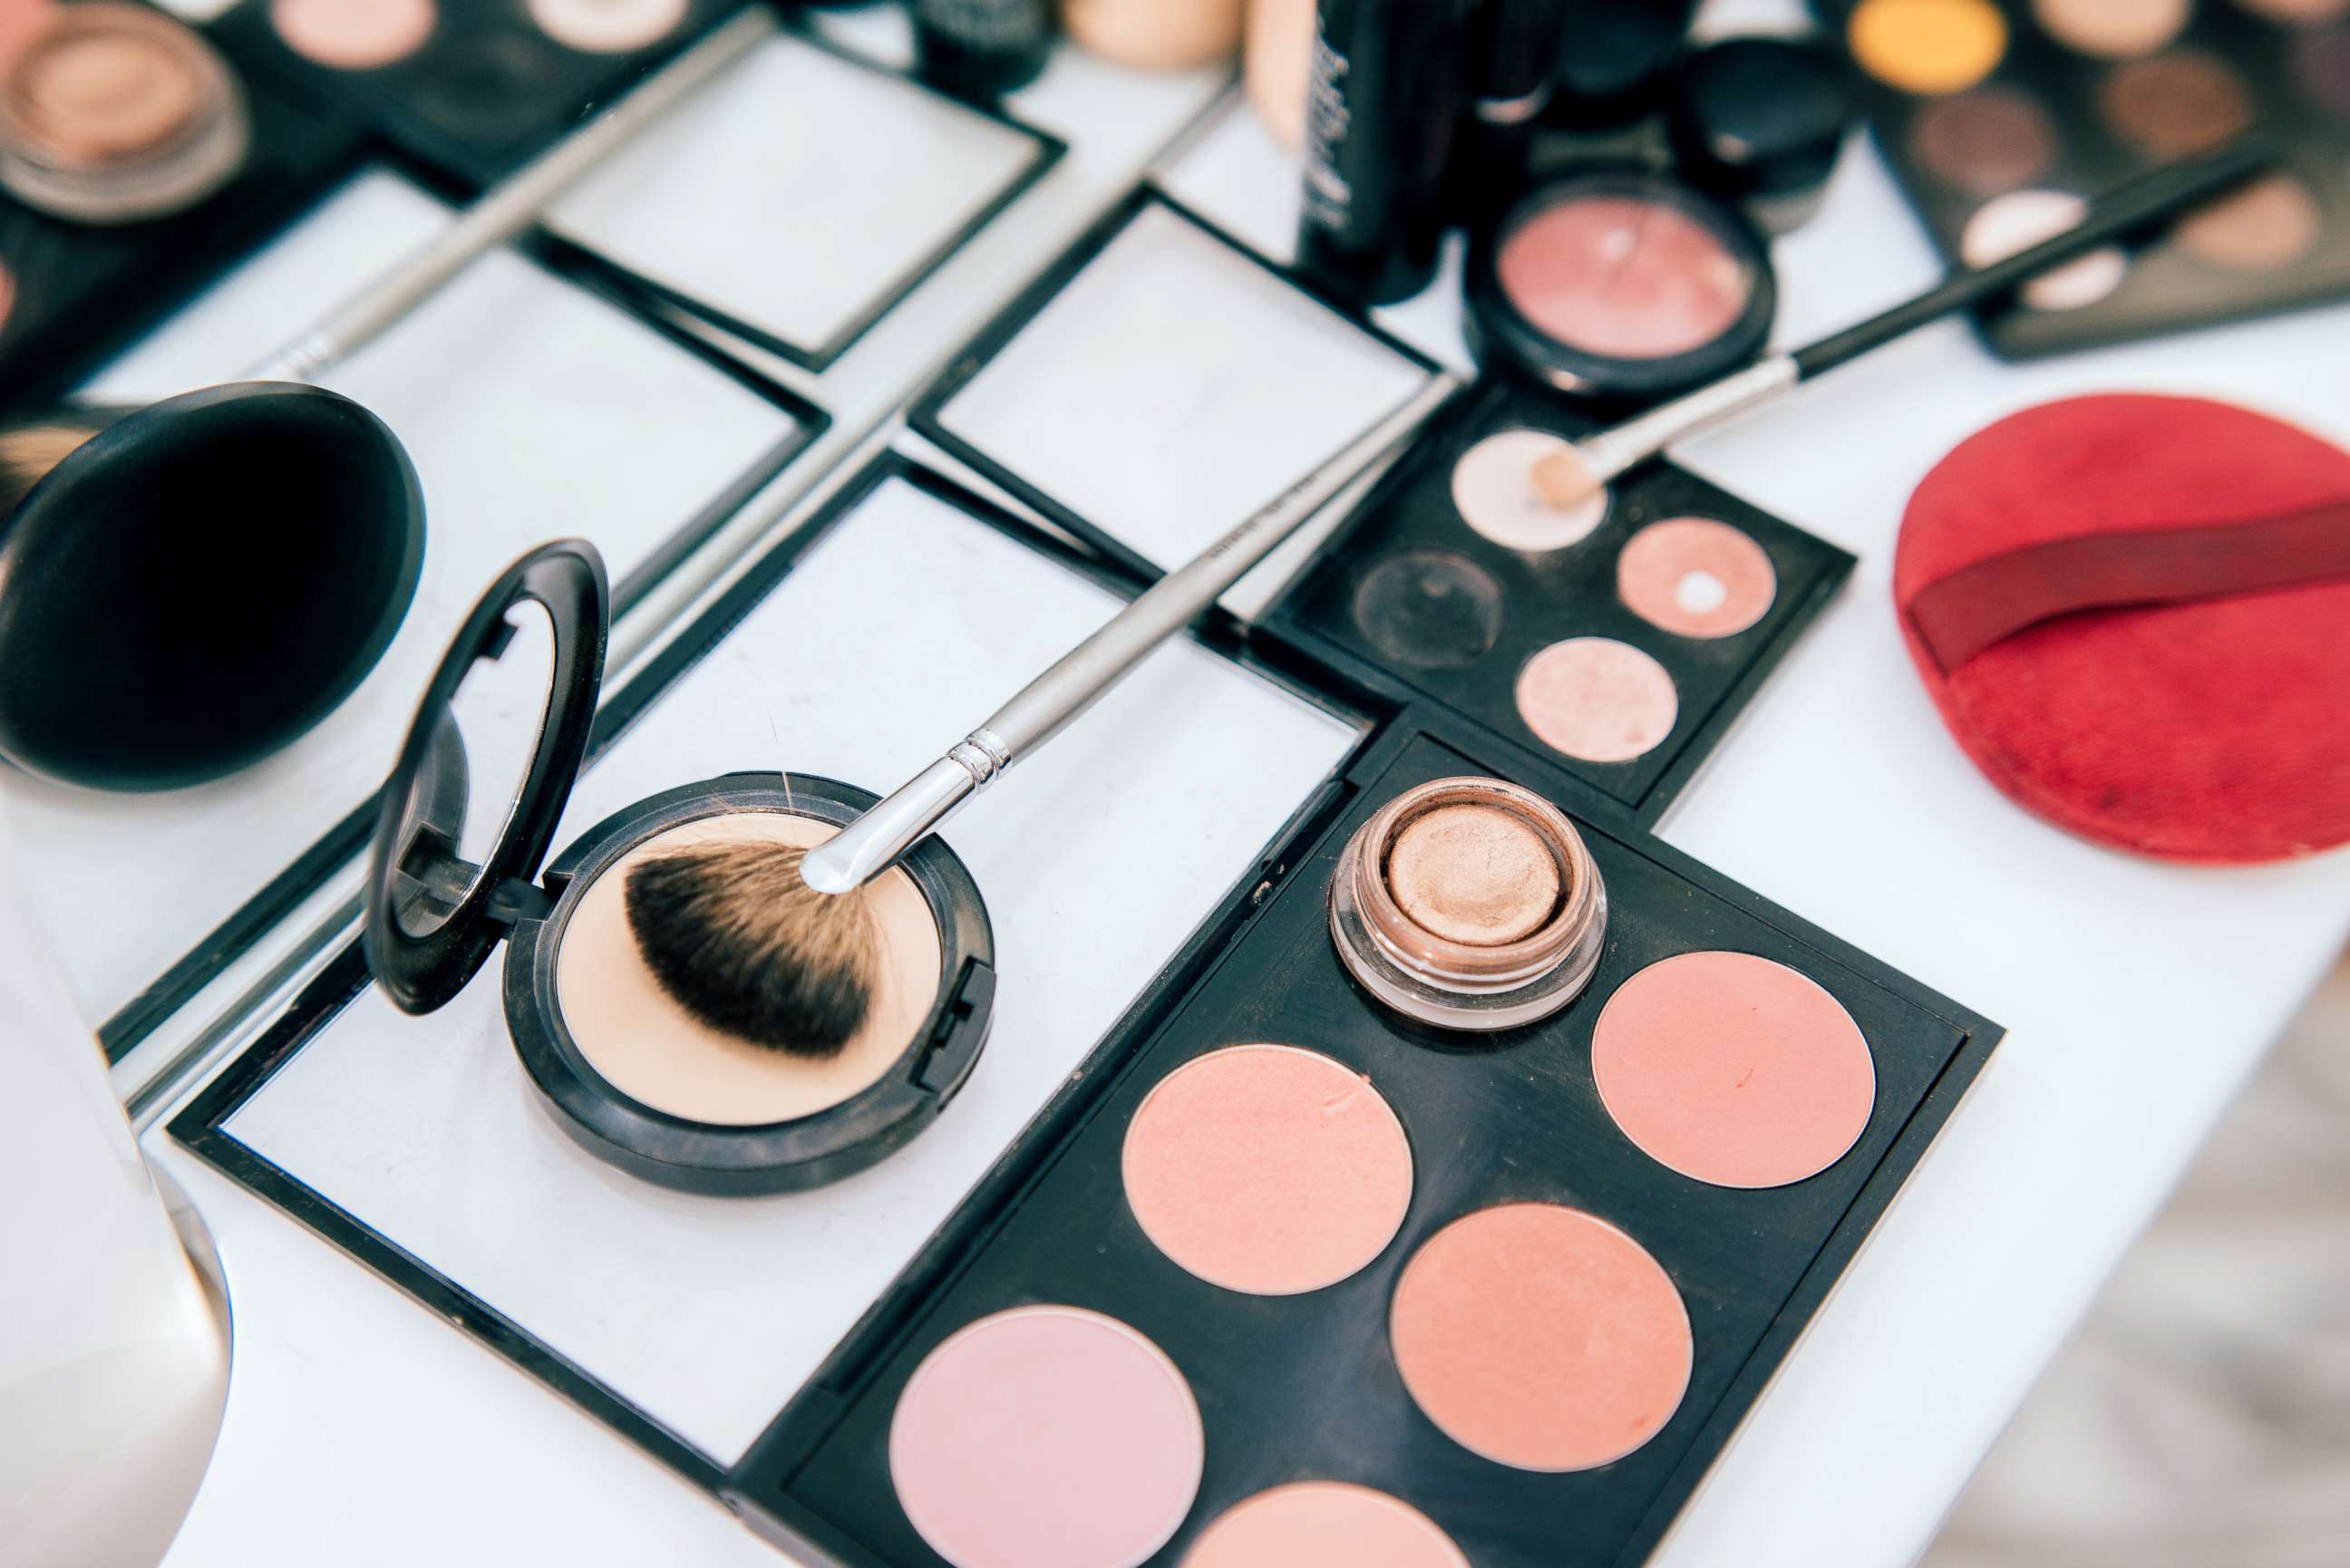 PHOTO: Makeup and brushes are seen in this stock photo.